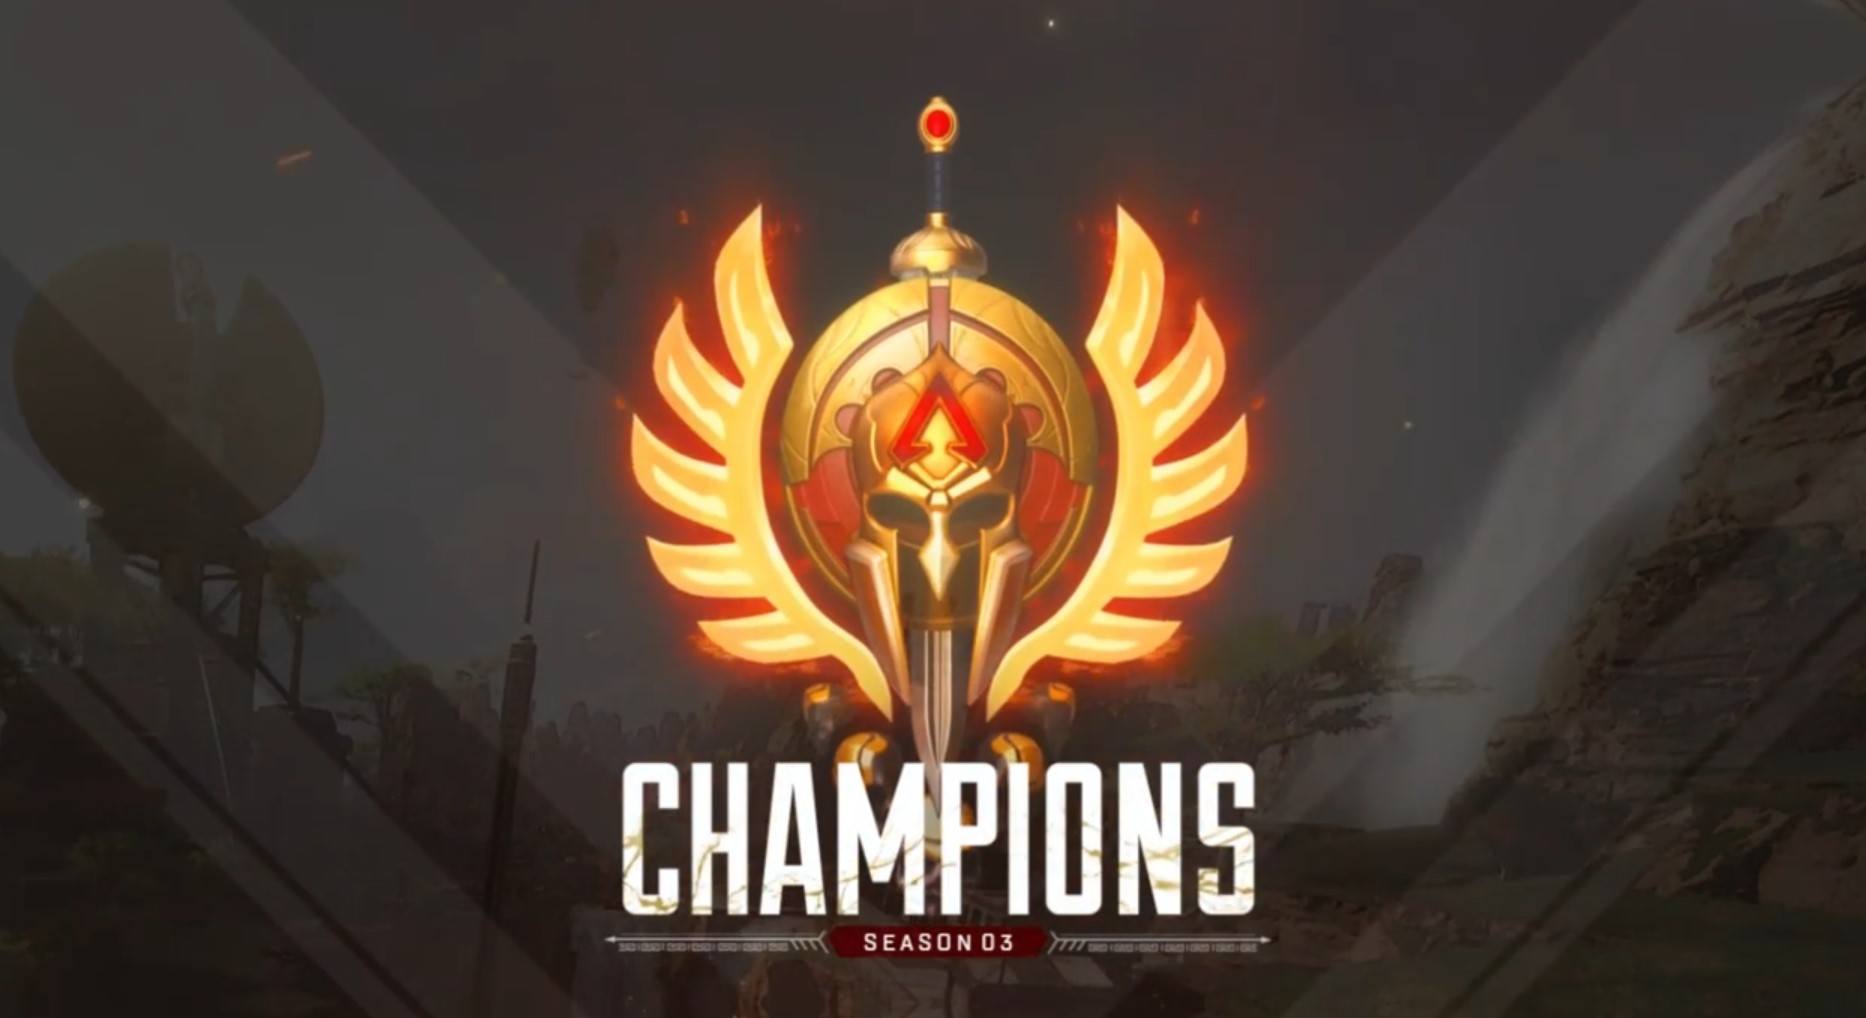 Apex Legends Mobile Season 3 - Champions is Now Live, Featuring a New Legend, Battle Pass and More